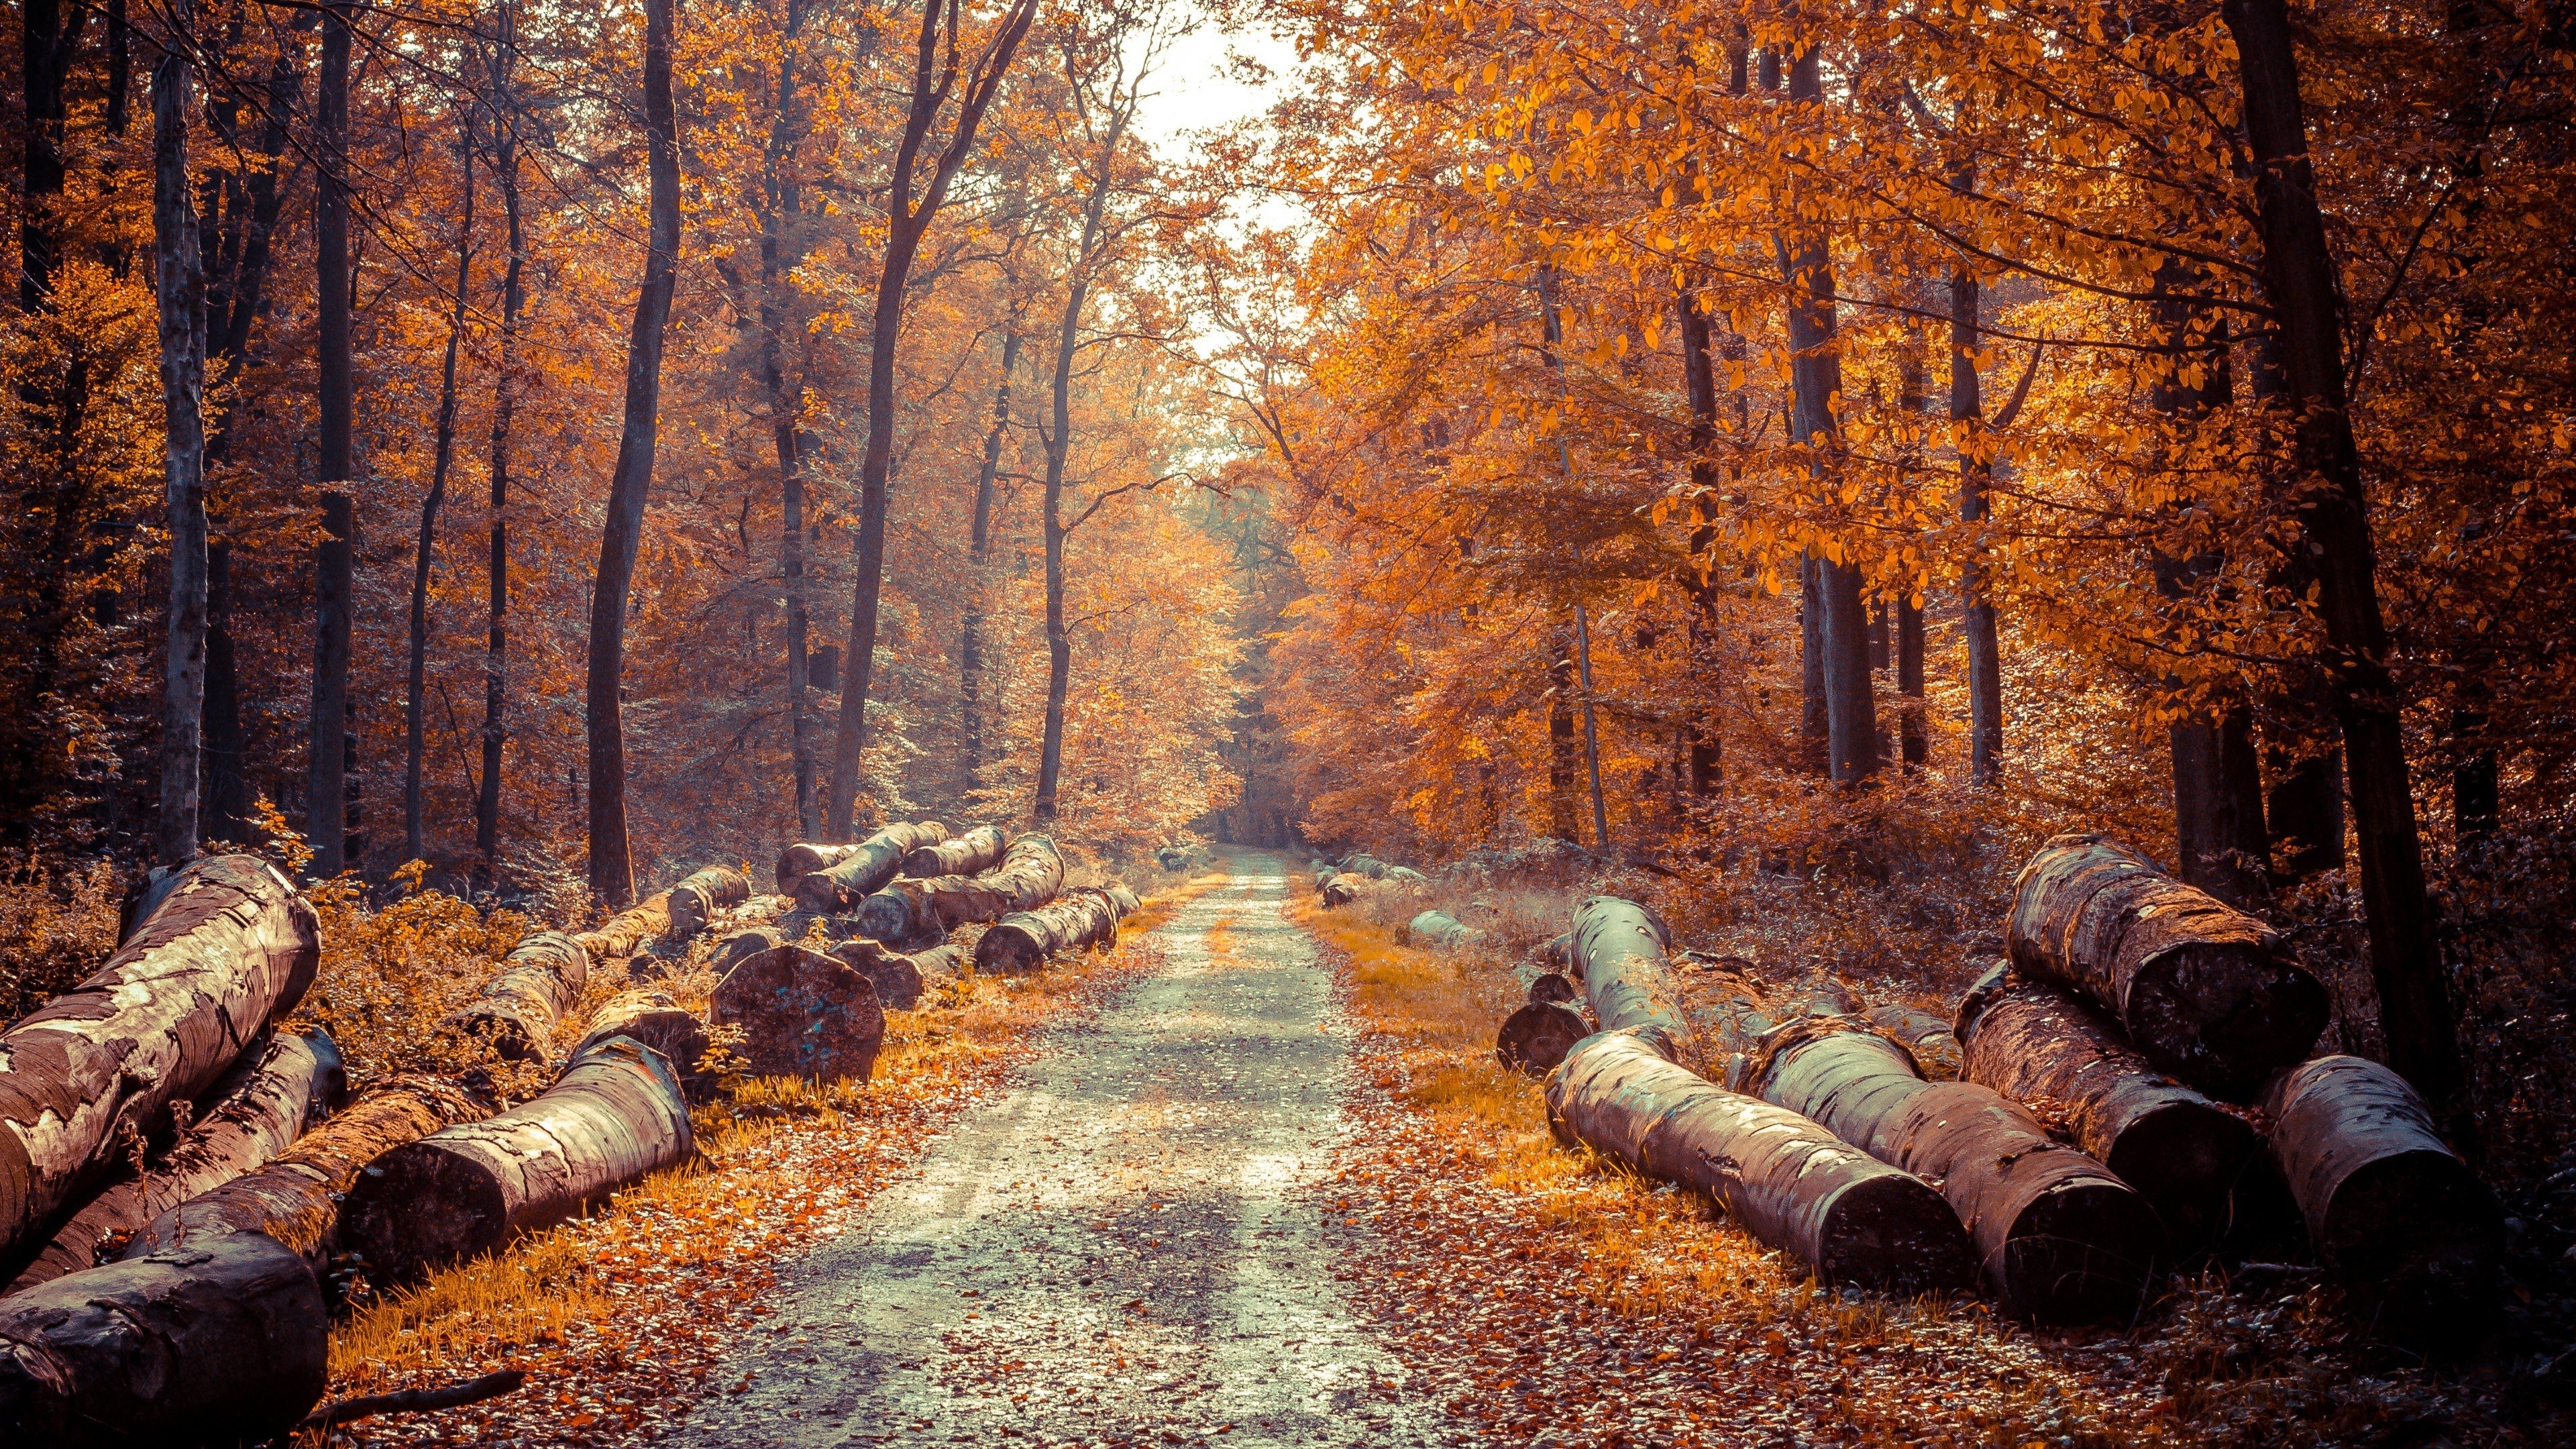 Aesthetic autumn fall Wallpaper Download